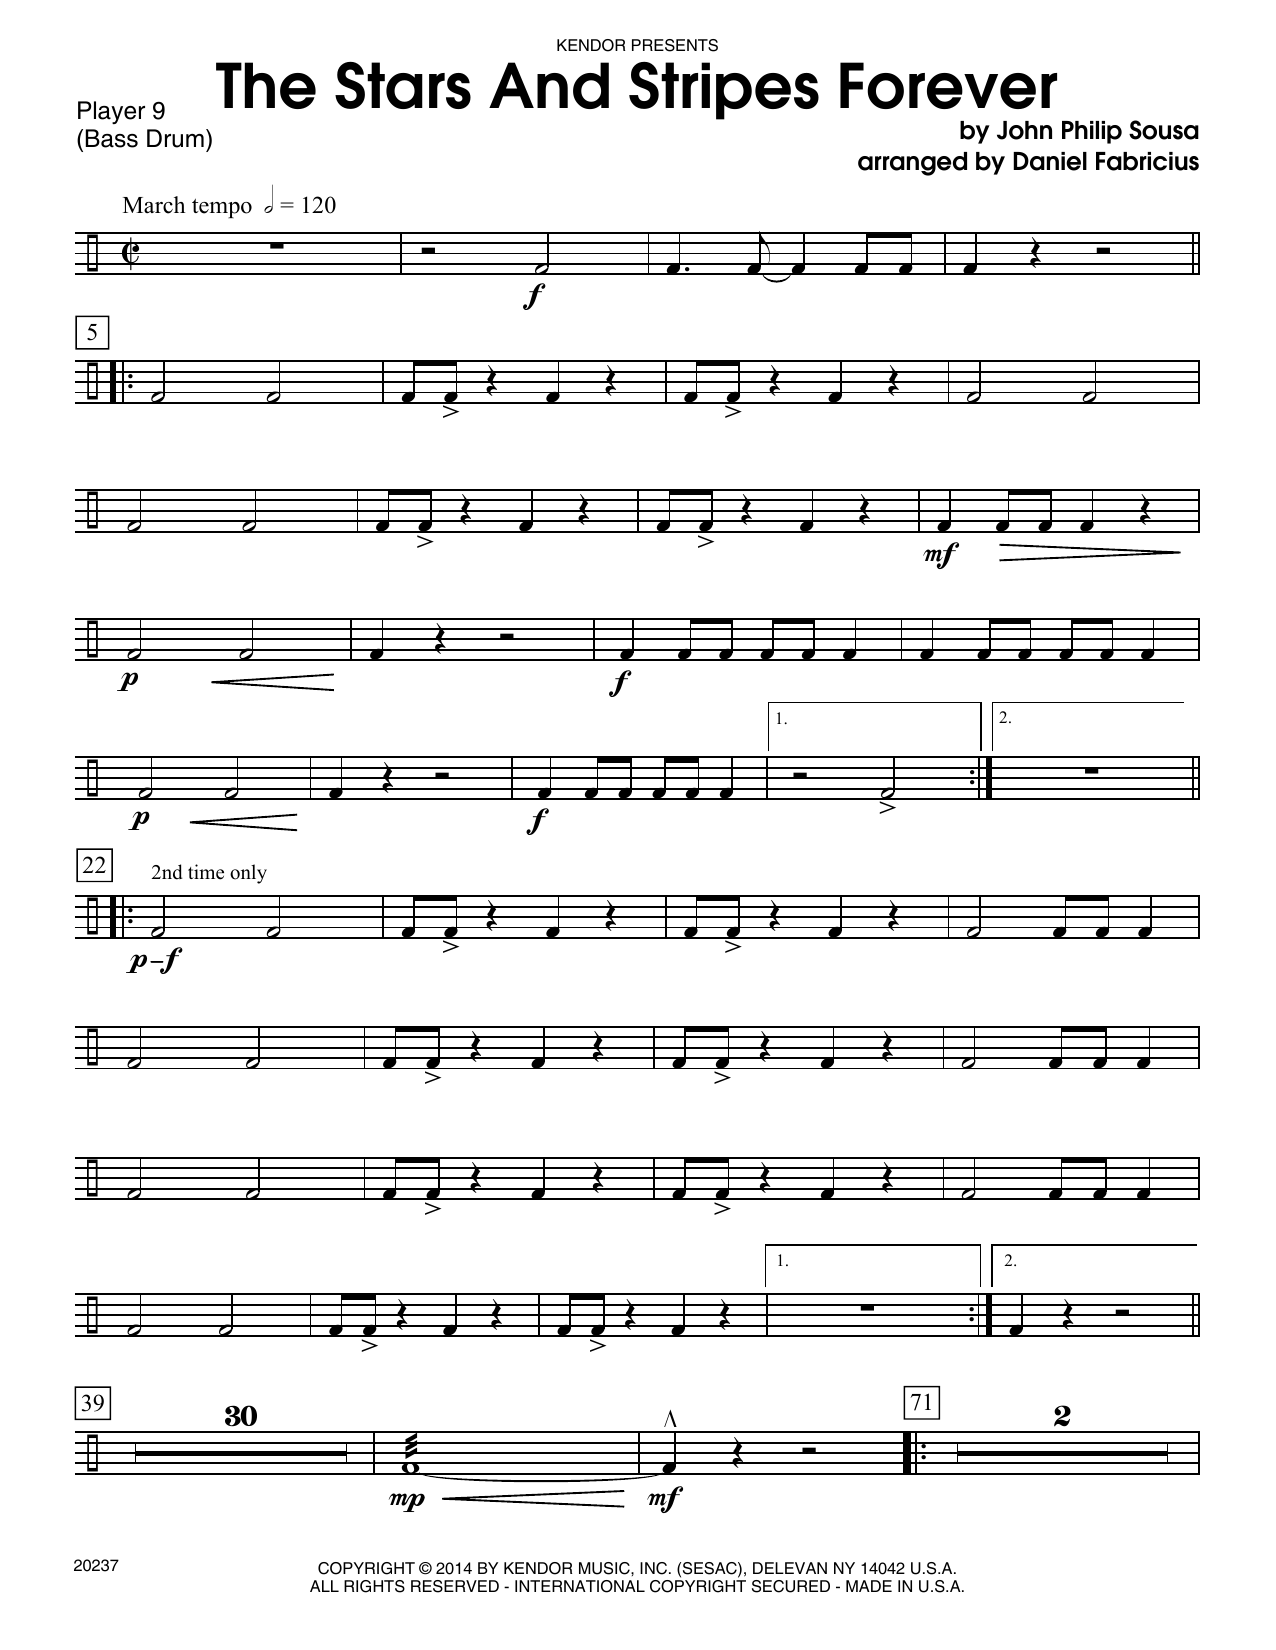 Download Daniel Fabricious The Stars And Stripes Forever - Percuss Sheet Music